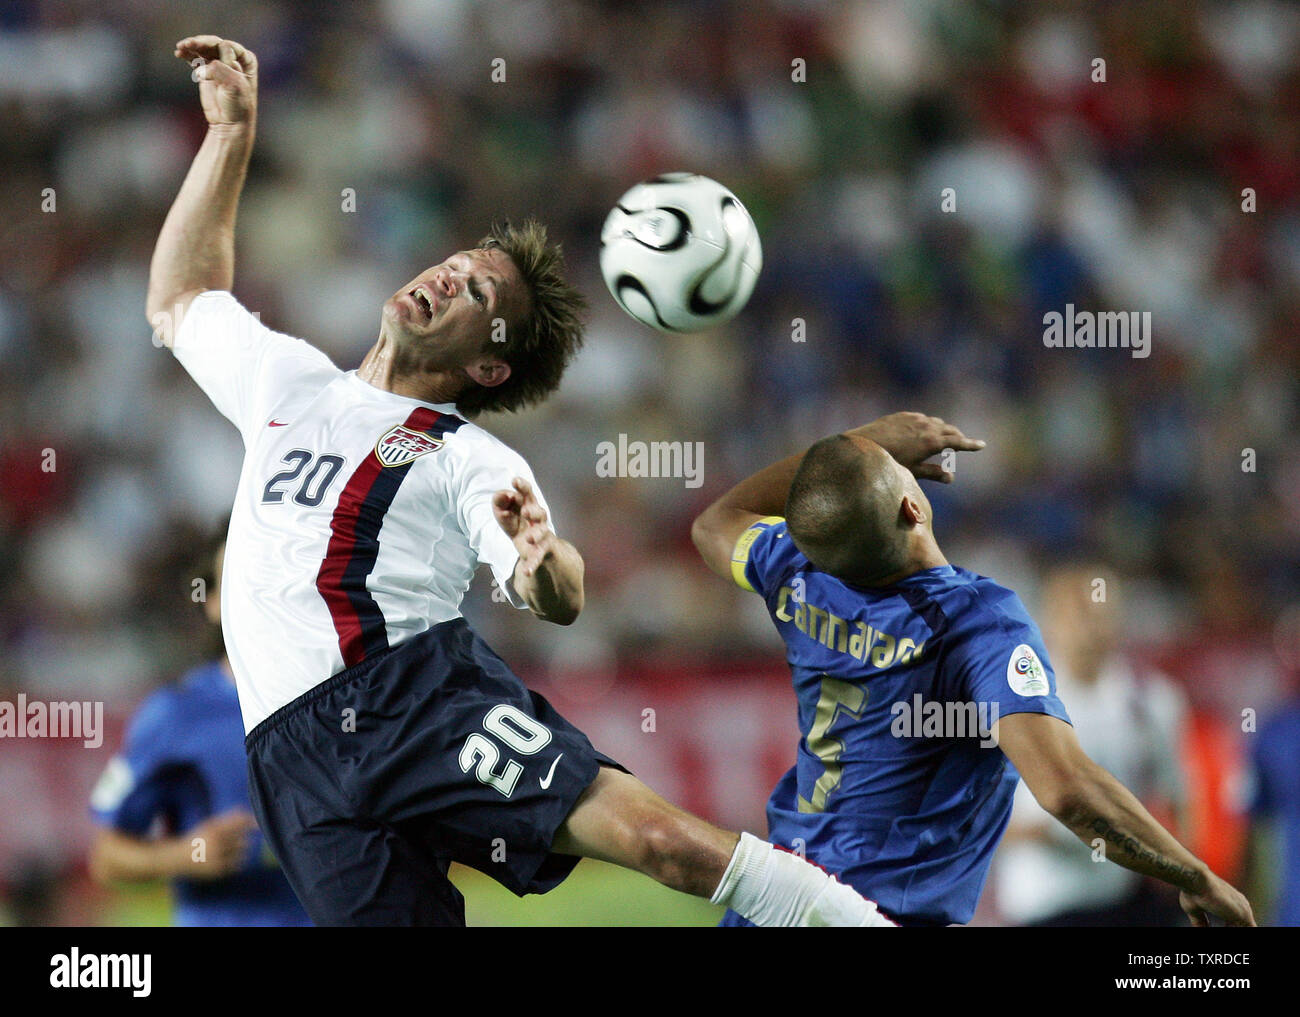 USA's Brian Mc Bride fights for the ball against Italy's Fabio Cannavaro in there World Cup  match up in Kaiserslautern, Germany on June 17, 2006. JAPAN OUT (Japan Out/UPI Photo / Tobias Kuberski) Stock Photo